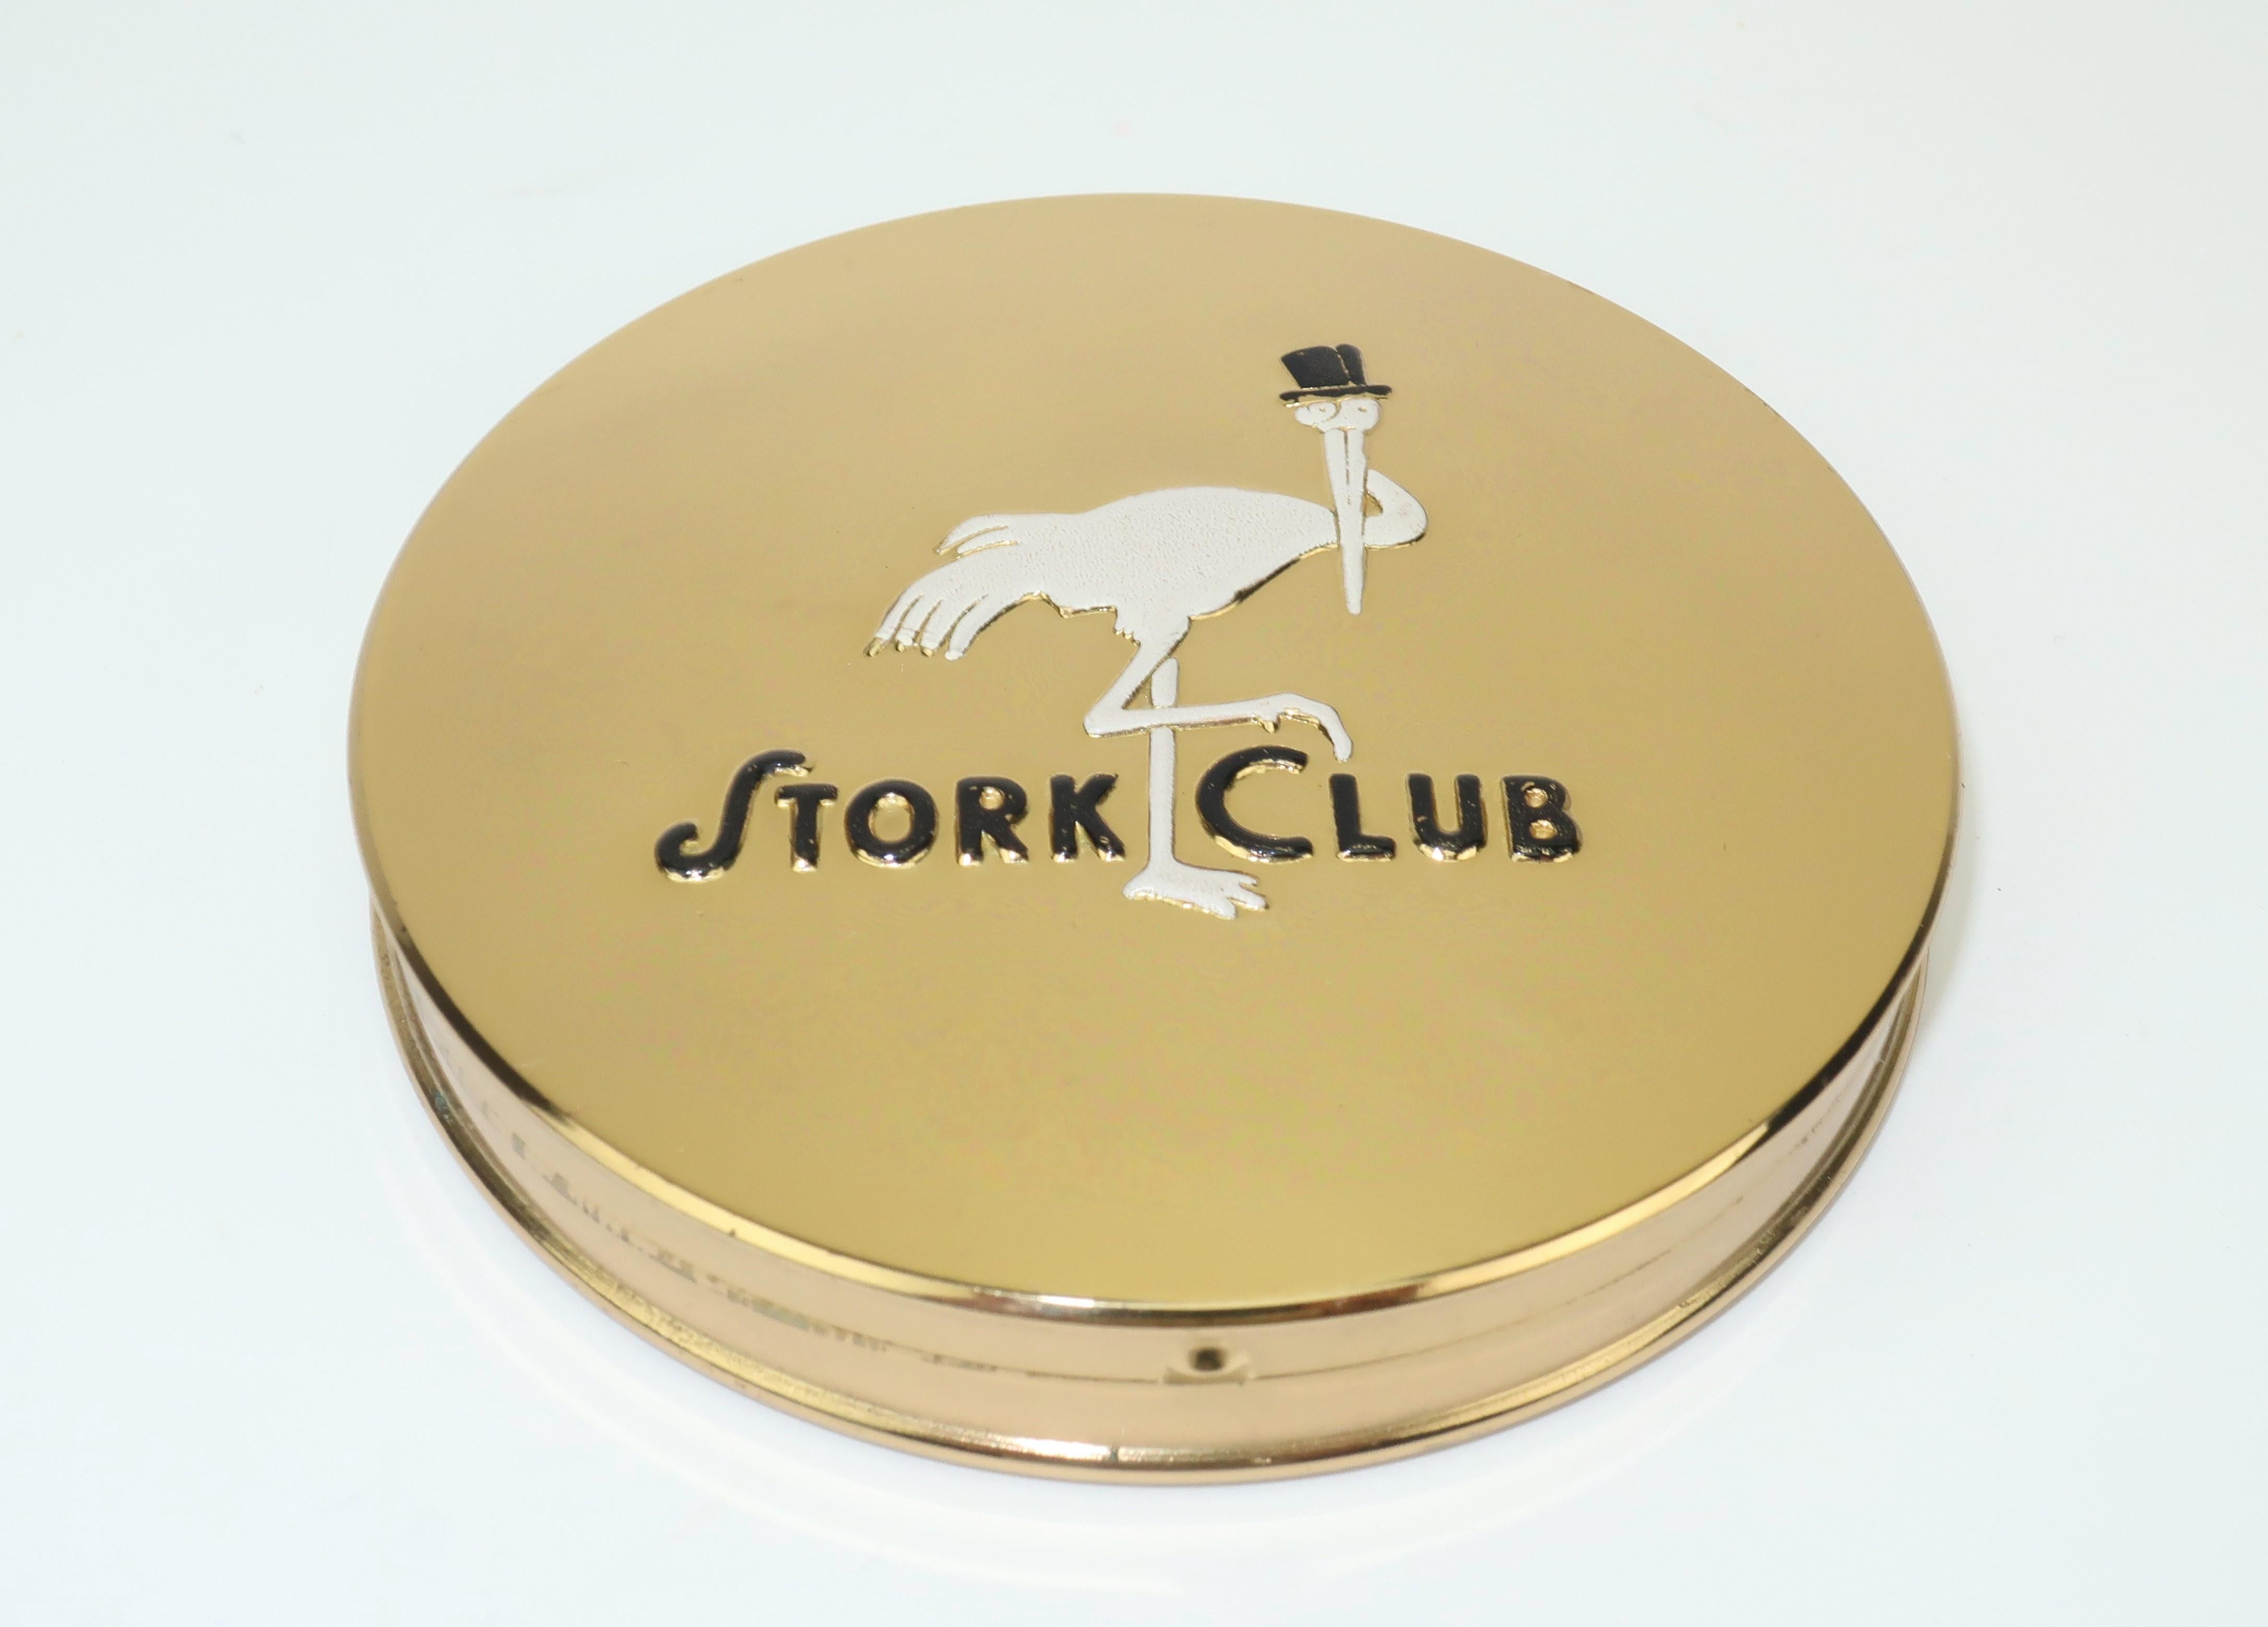 Own a piece of New York history with a souvenir gold tone powder compact from the famed Stork Club of Manhattan.  The compact displays the iconic art deco Stork Club logo in black and white enamel and the mirrored interior holds unused compressed